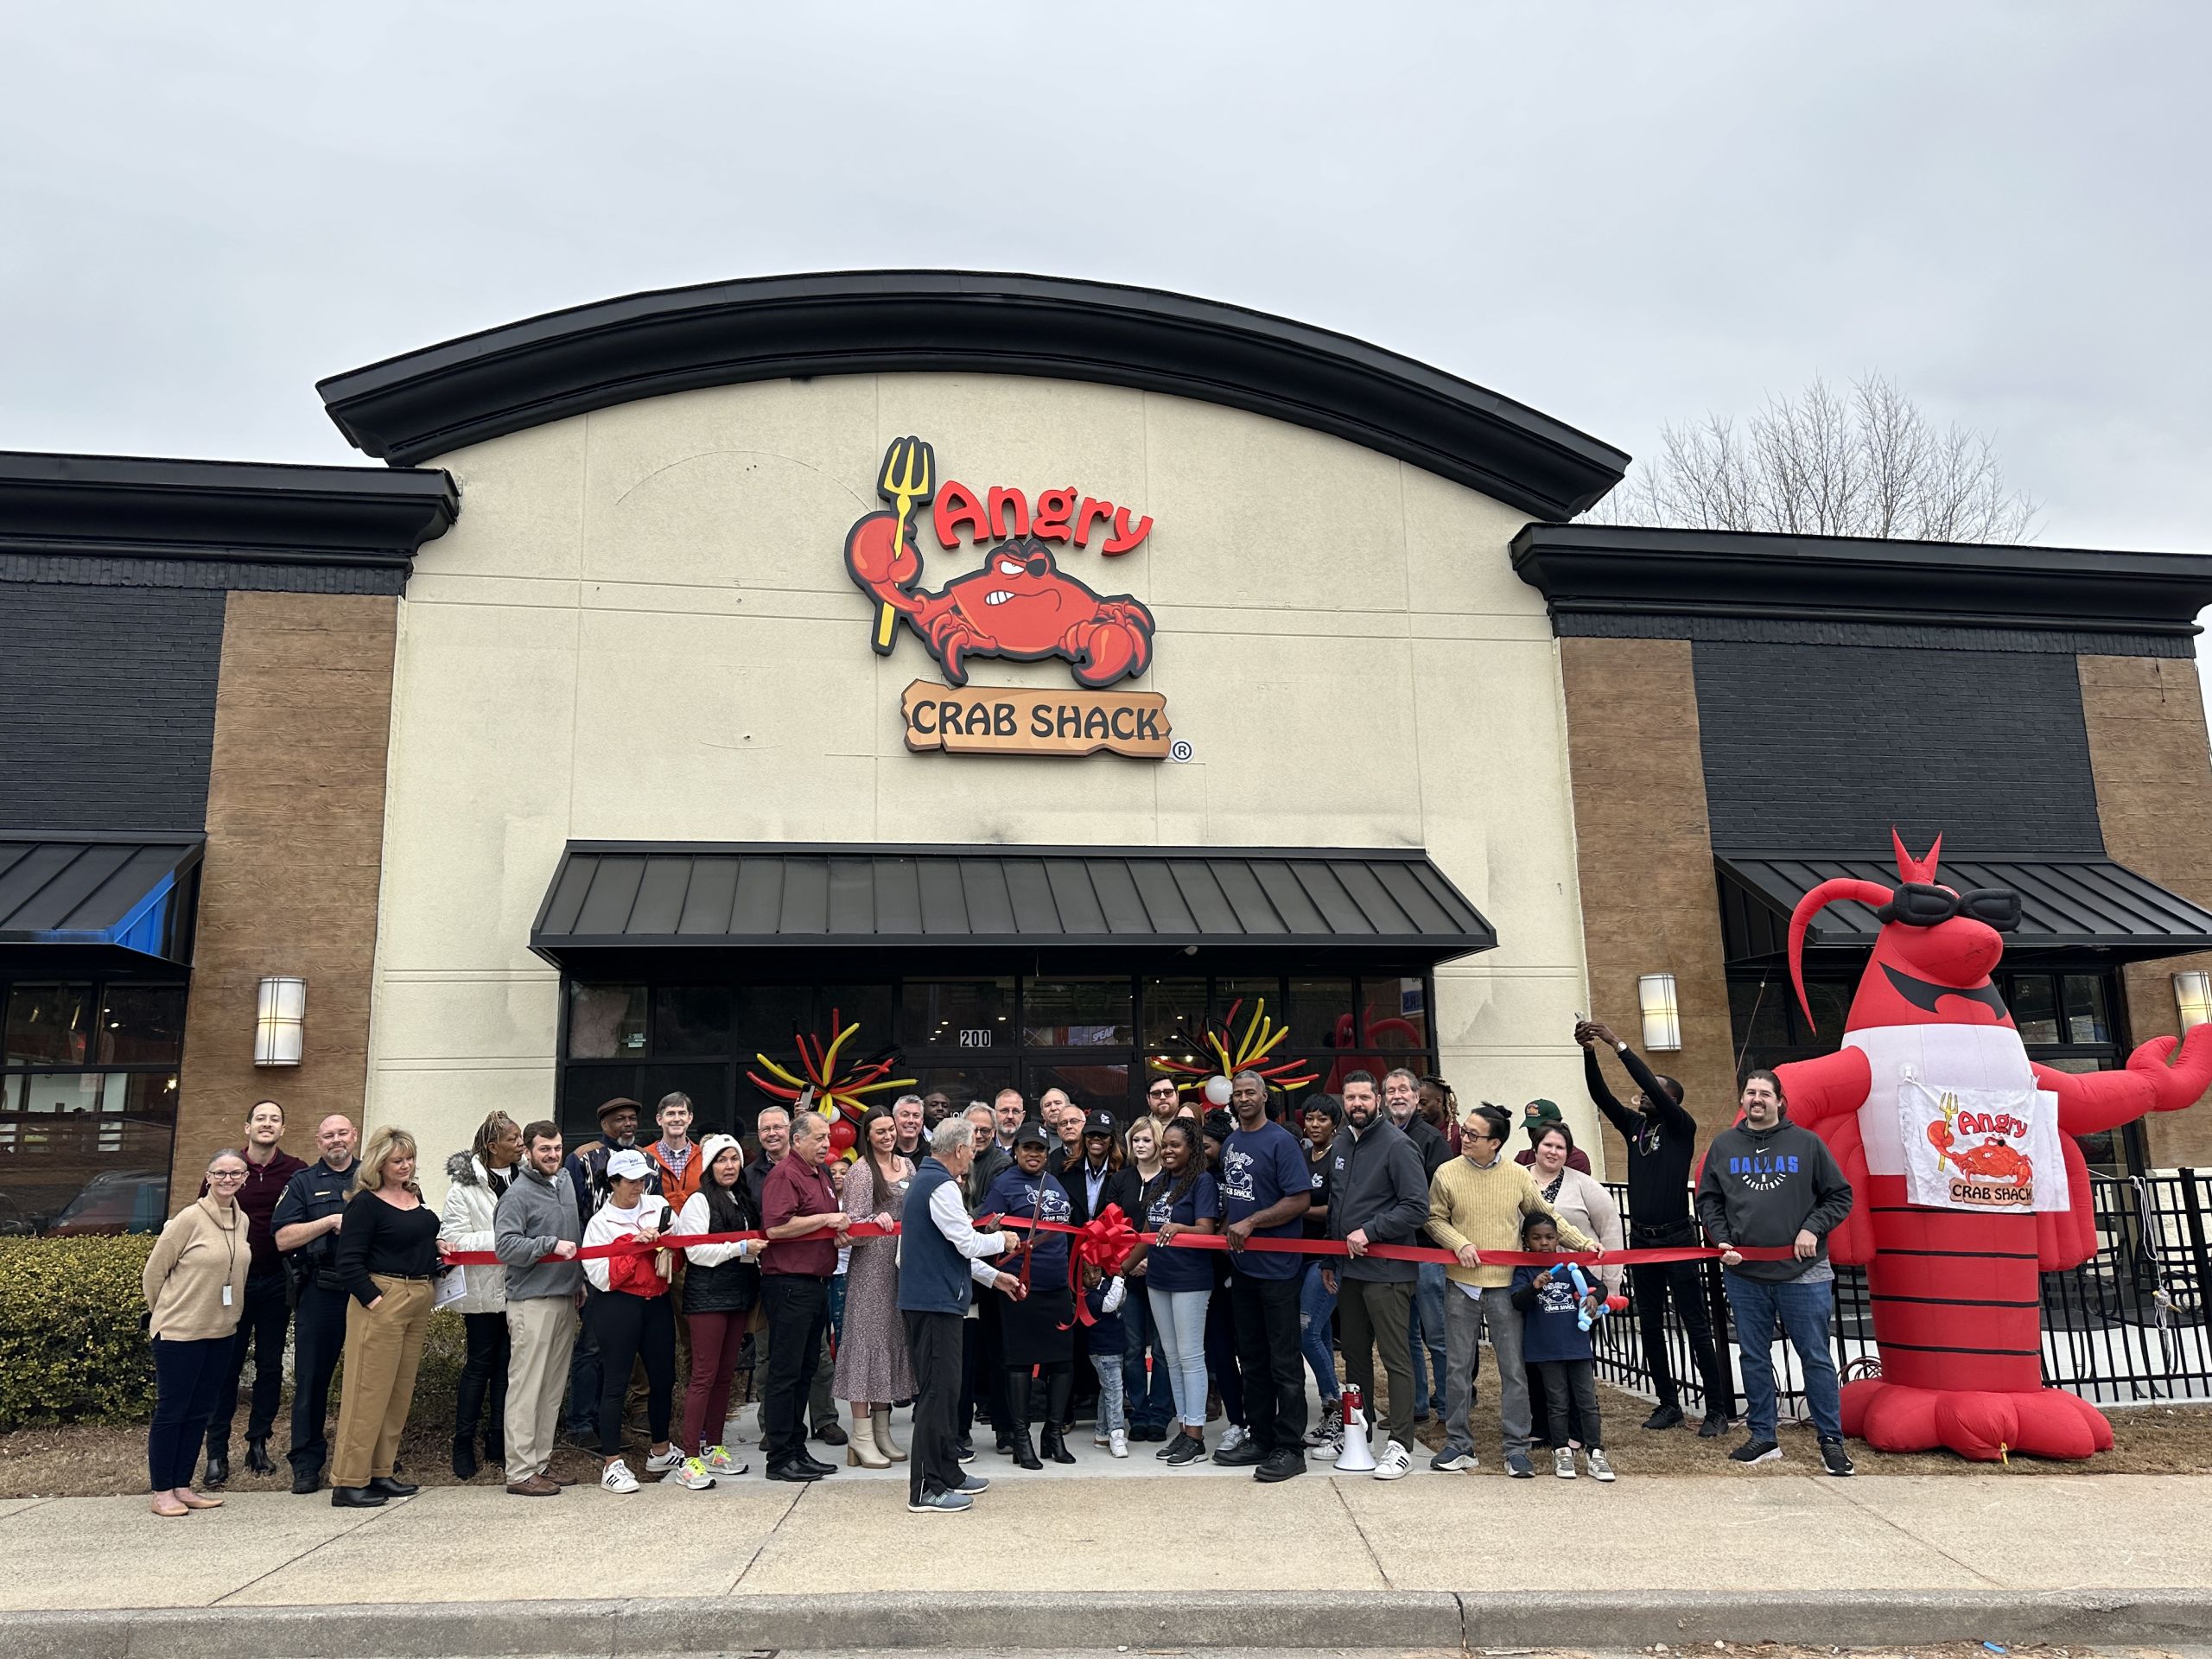 Image Red Ribbon Being Cut with Group of People at Acworth Angry Crab Shack